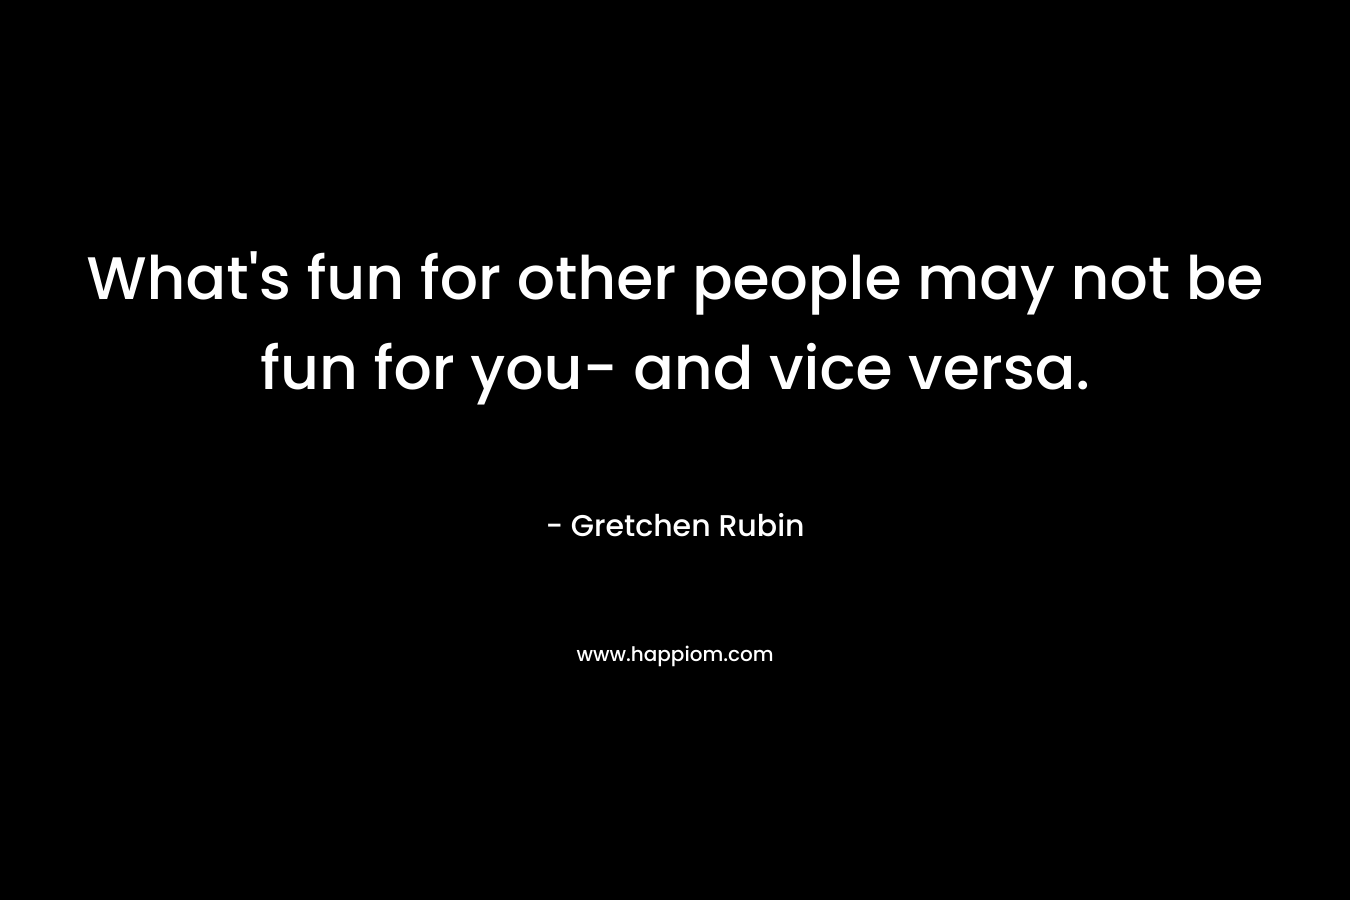 What’s fun for other people may not be fun for you- and vice versa. – Gretchen Rubin